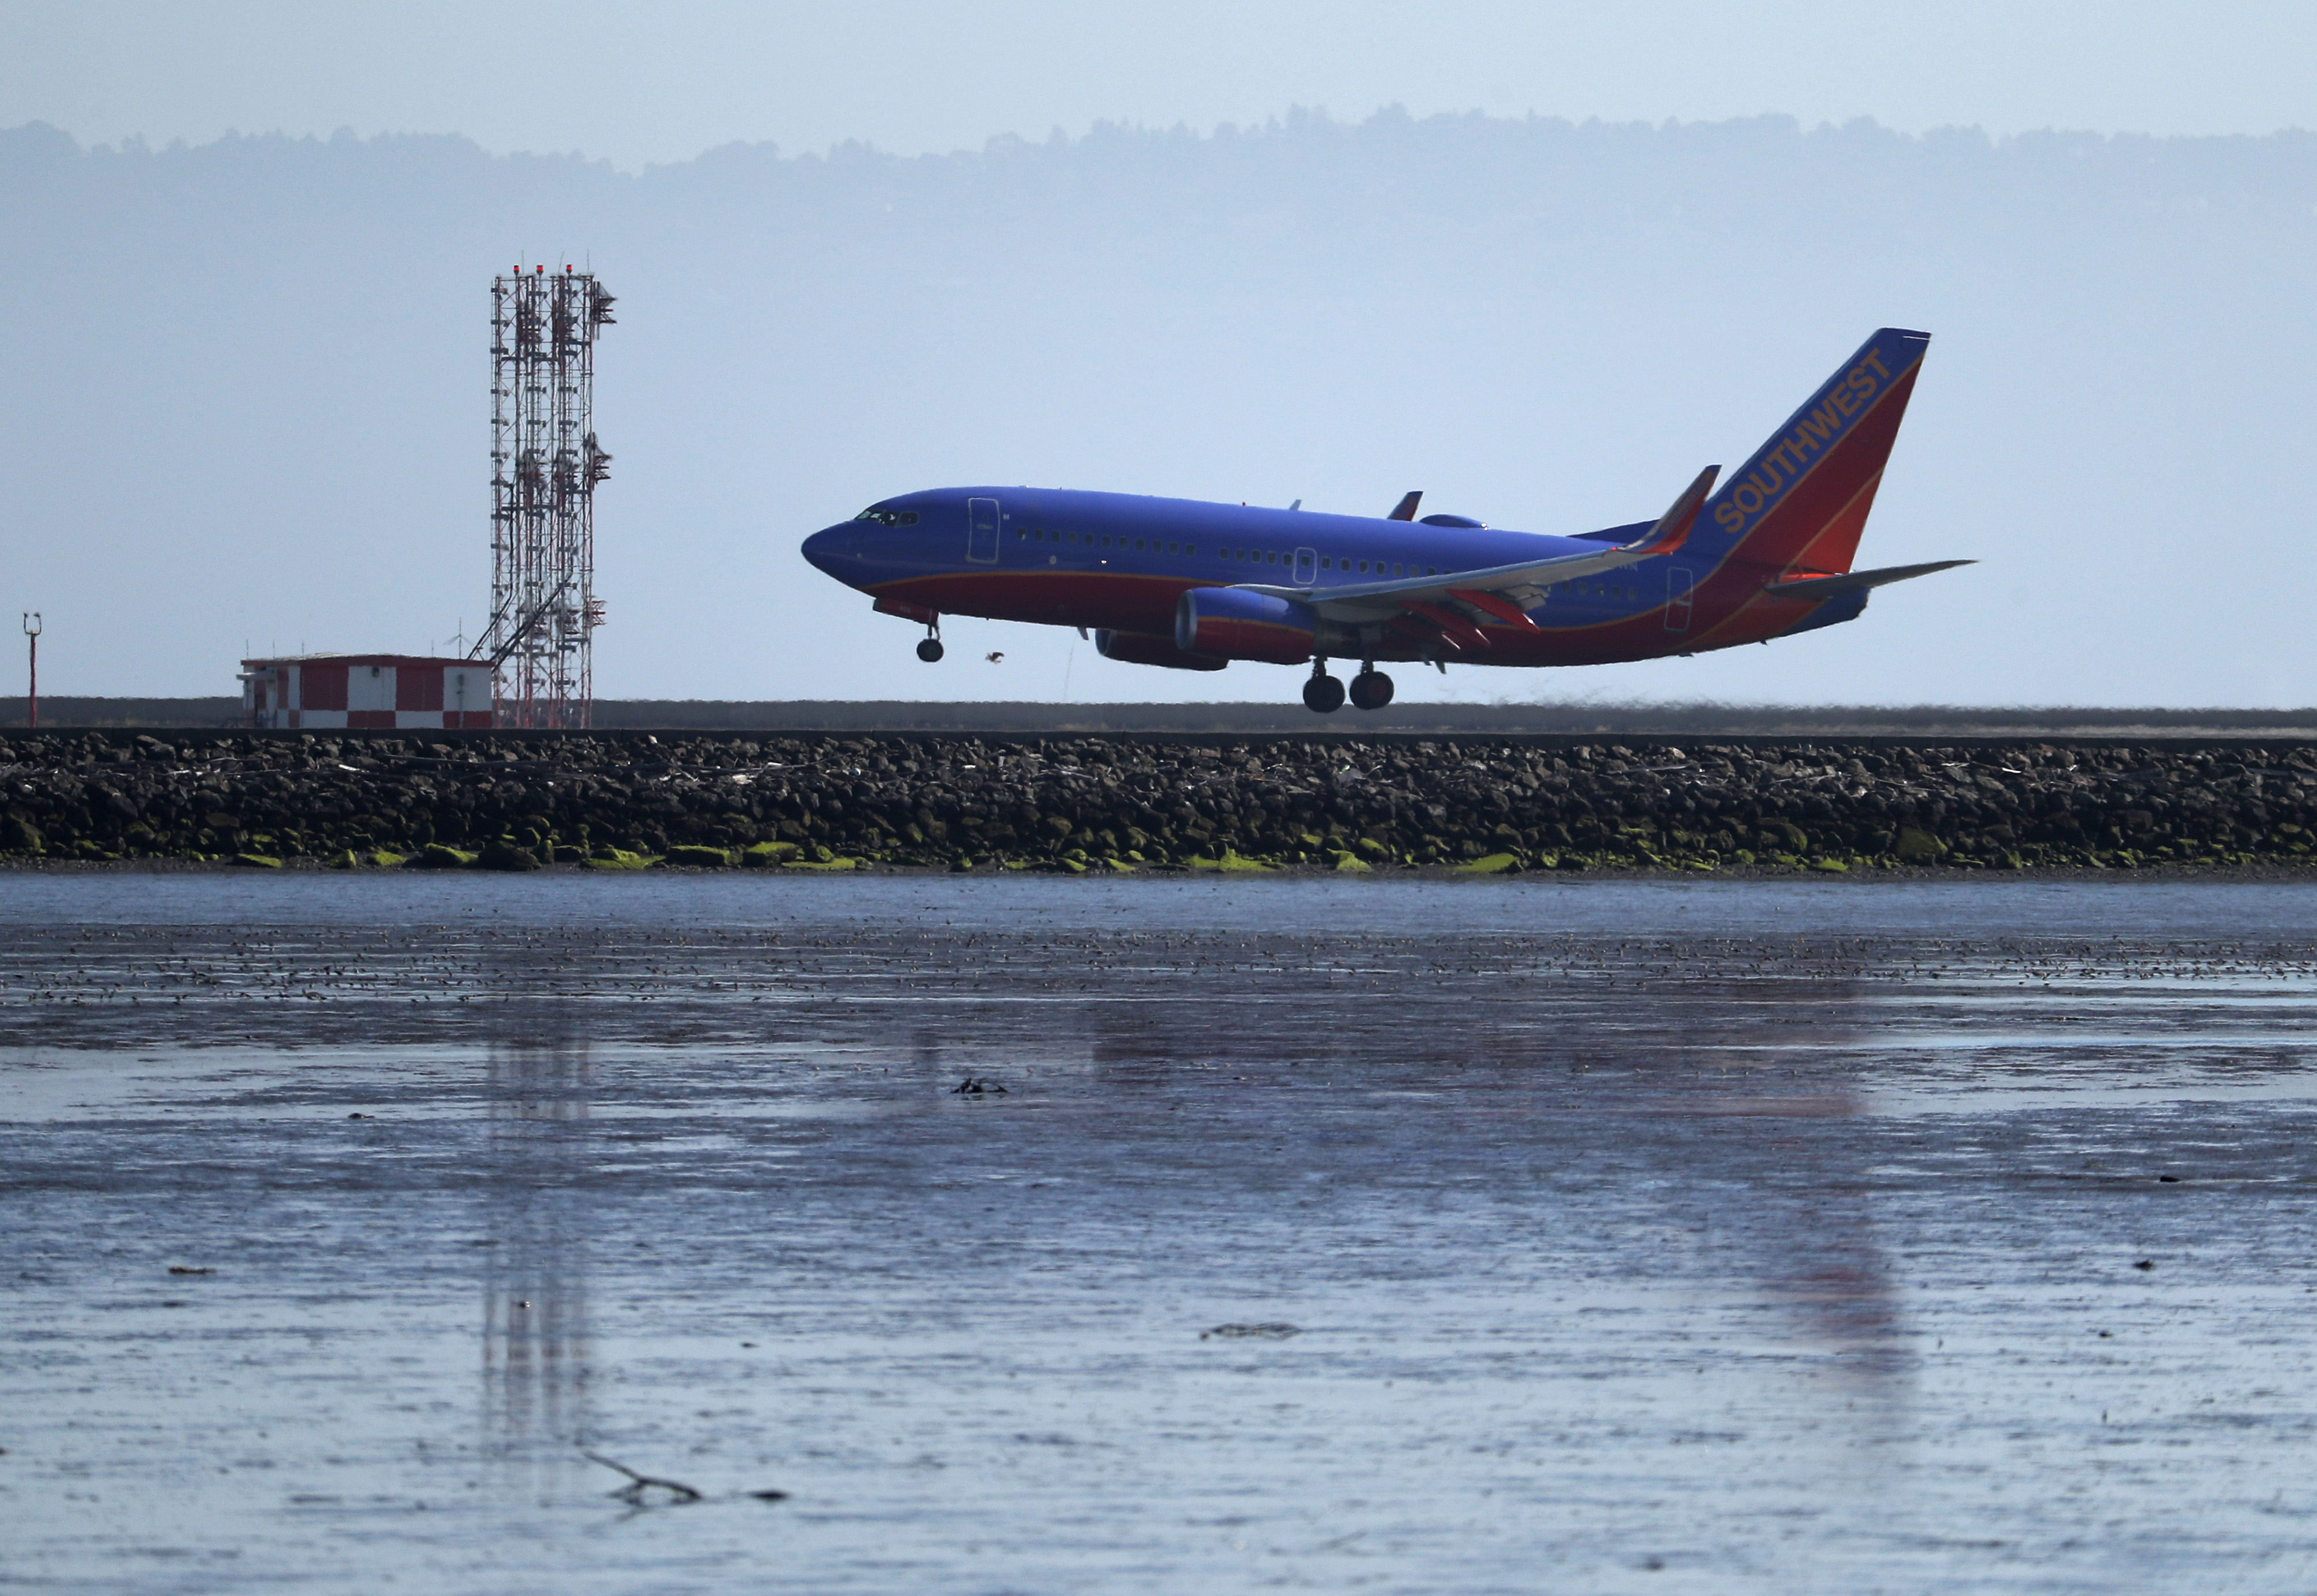 A Boeing 737 plane on the runway at San Francisco International Airport, seen in profile.